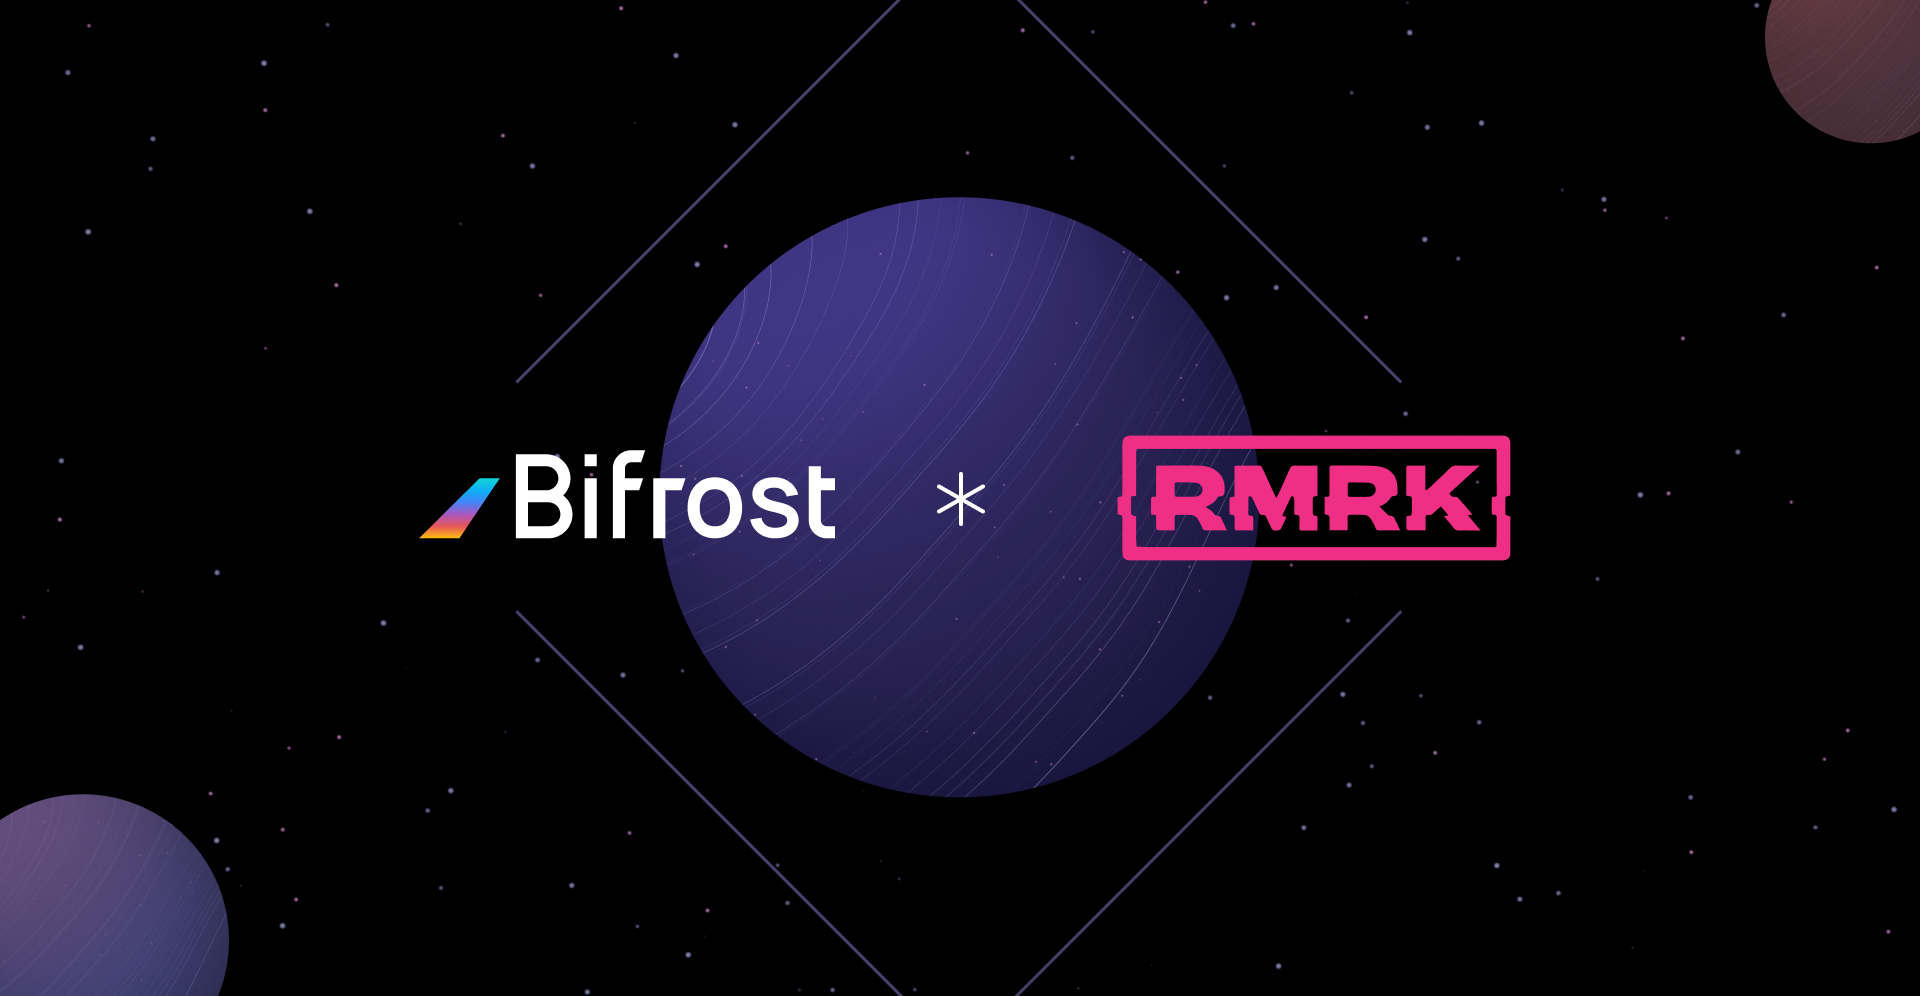 Bifrost Partners with NFT Protocol RMRK to Facilitate Parachain Bidding by Distributing Limited NFTs